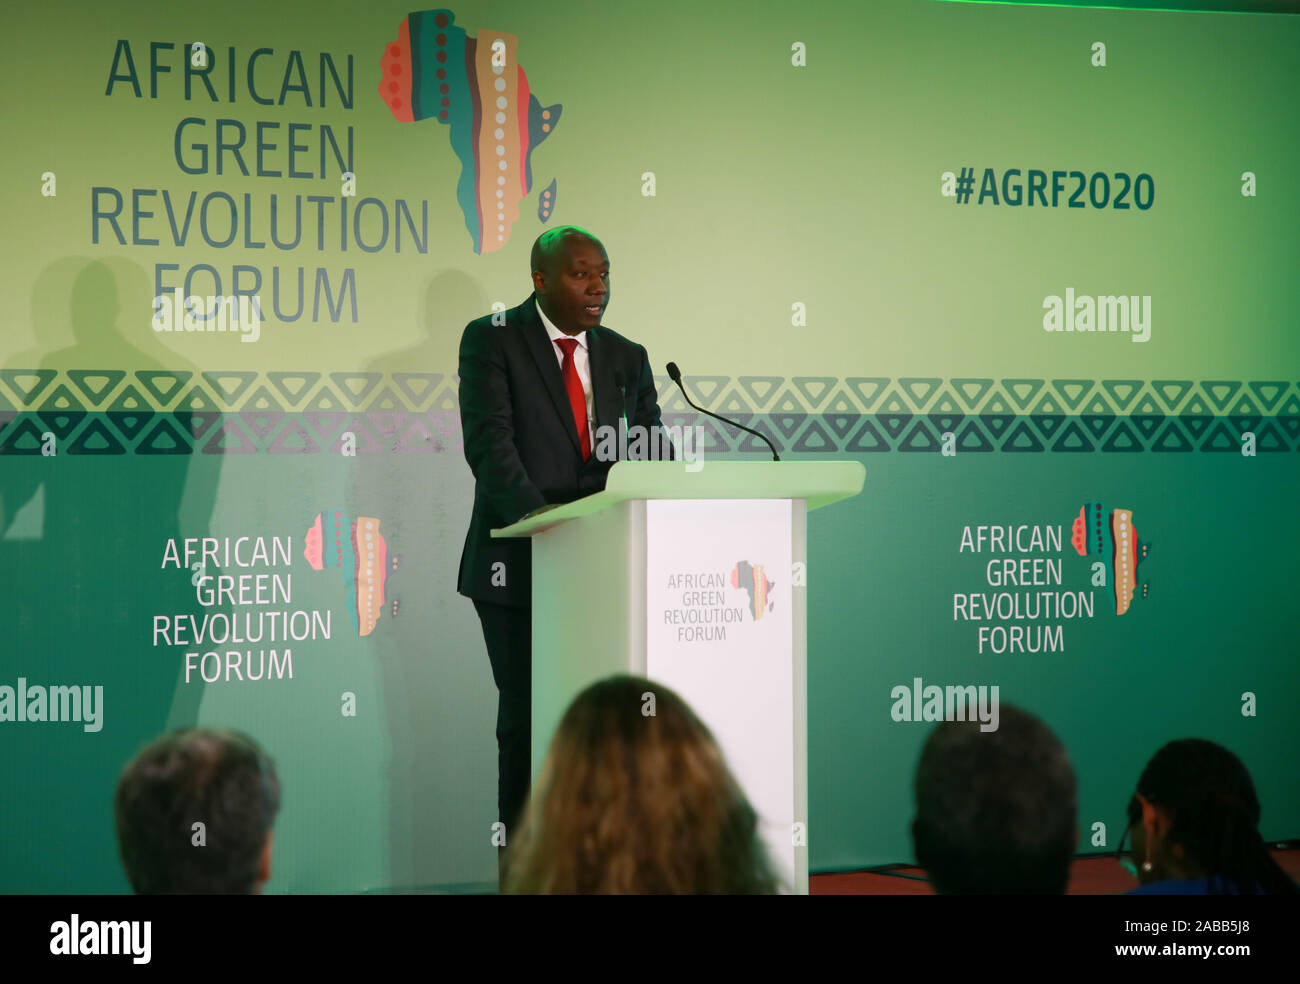 Kigali, Rwanda. 26th Nov, 2019. Rwandan Prime Minister Edouard Ngirente delivers remarks at an event to launch the African Green Revolution Forum (AGRF) 2020 Summit in Kigali, capital city of Rwanda, Nov. 26, 2019. New apporaches were emphazized on Monday in Rwanda's Kigali to address 'rising' cases of hunger and food insecurity challenges in Africa. Credit: Lyu Tianran/Xinhua/Alamy Live News Stock Photo